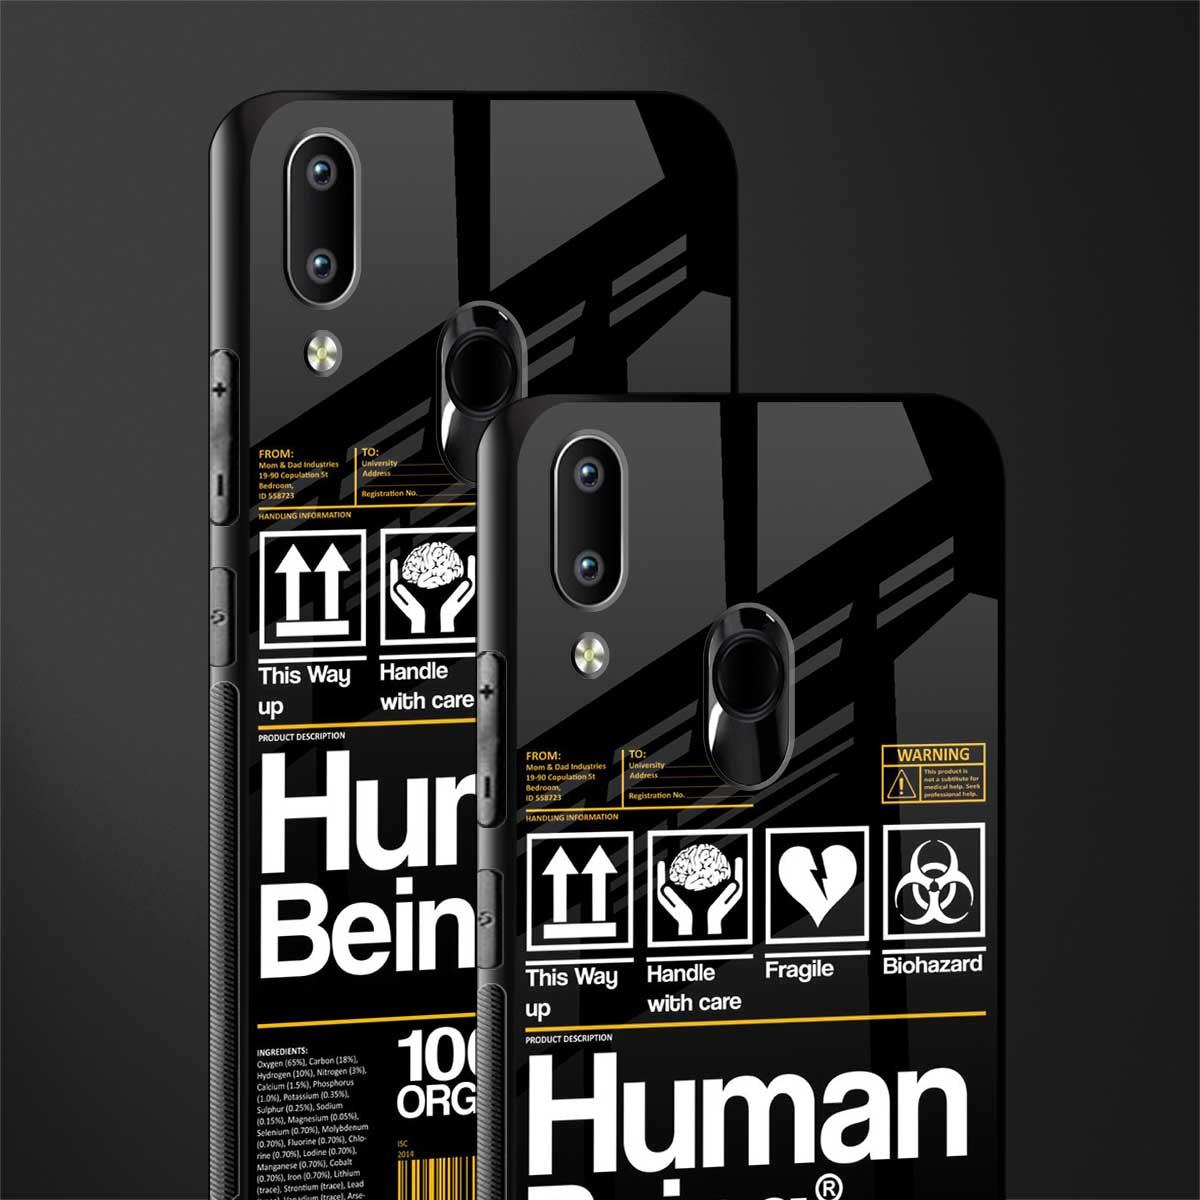 human being label phone cover for vivo y91